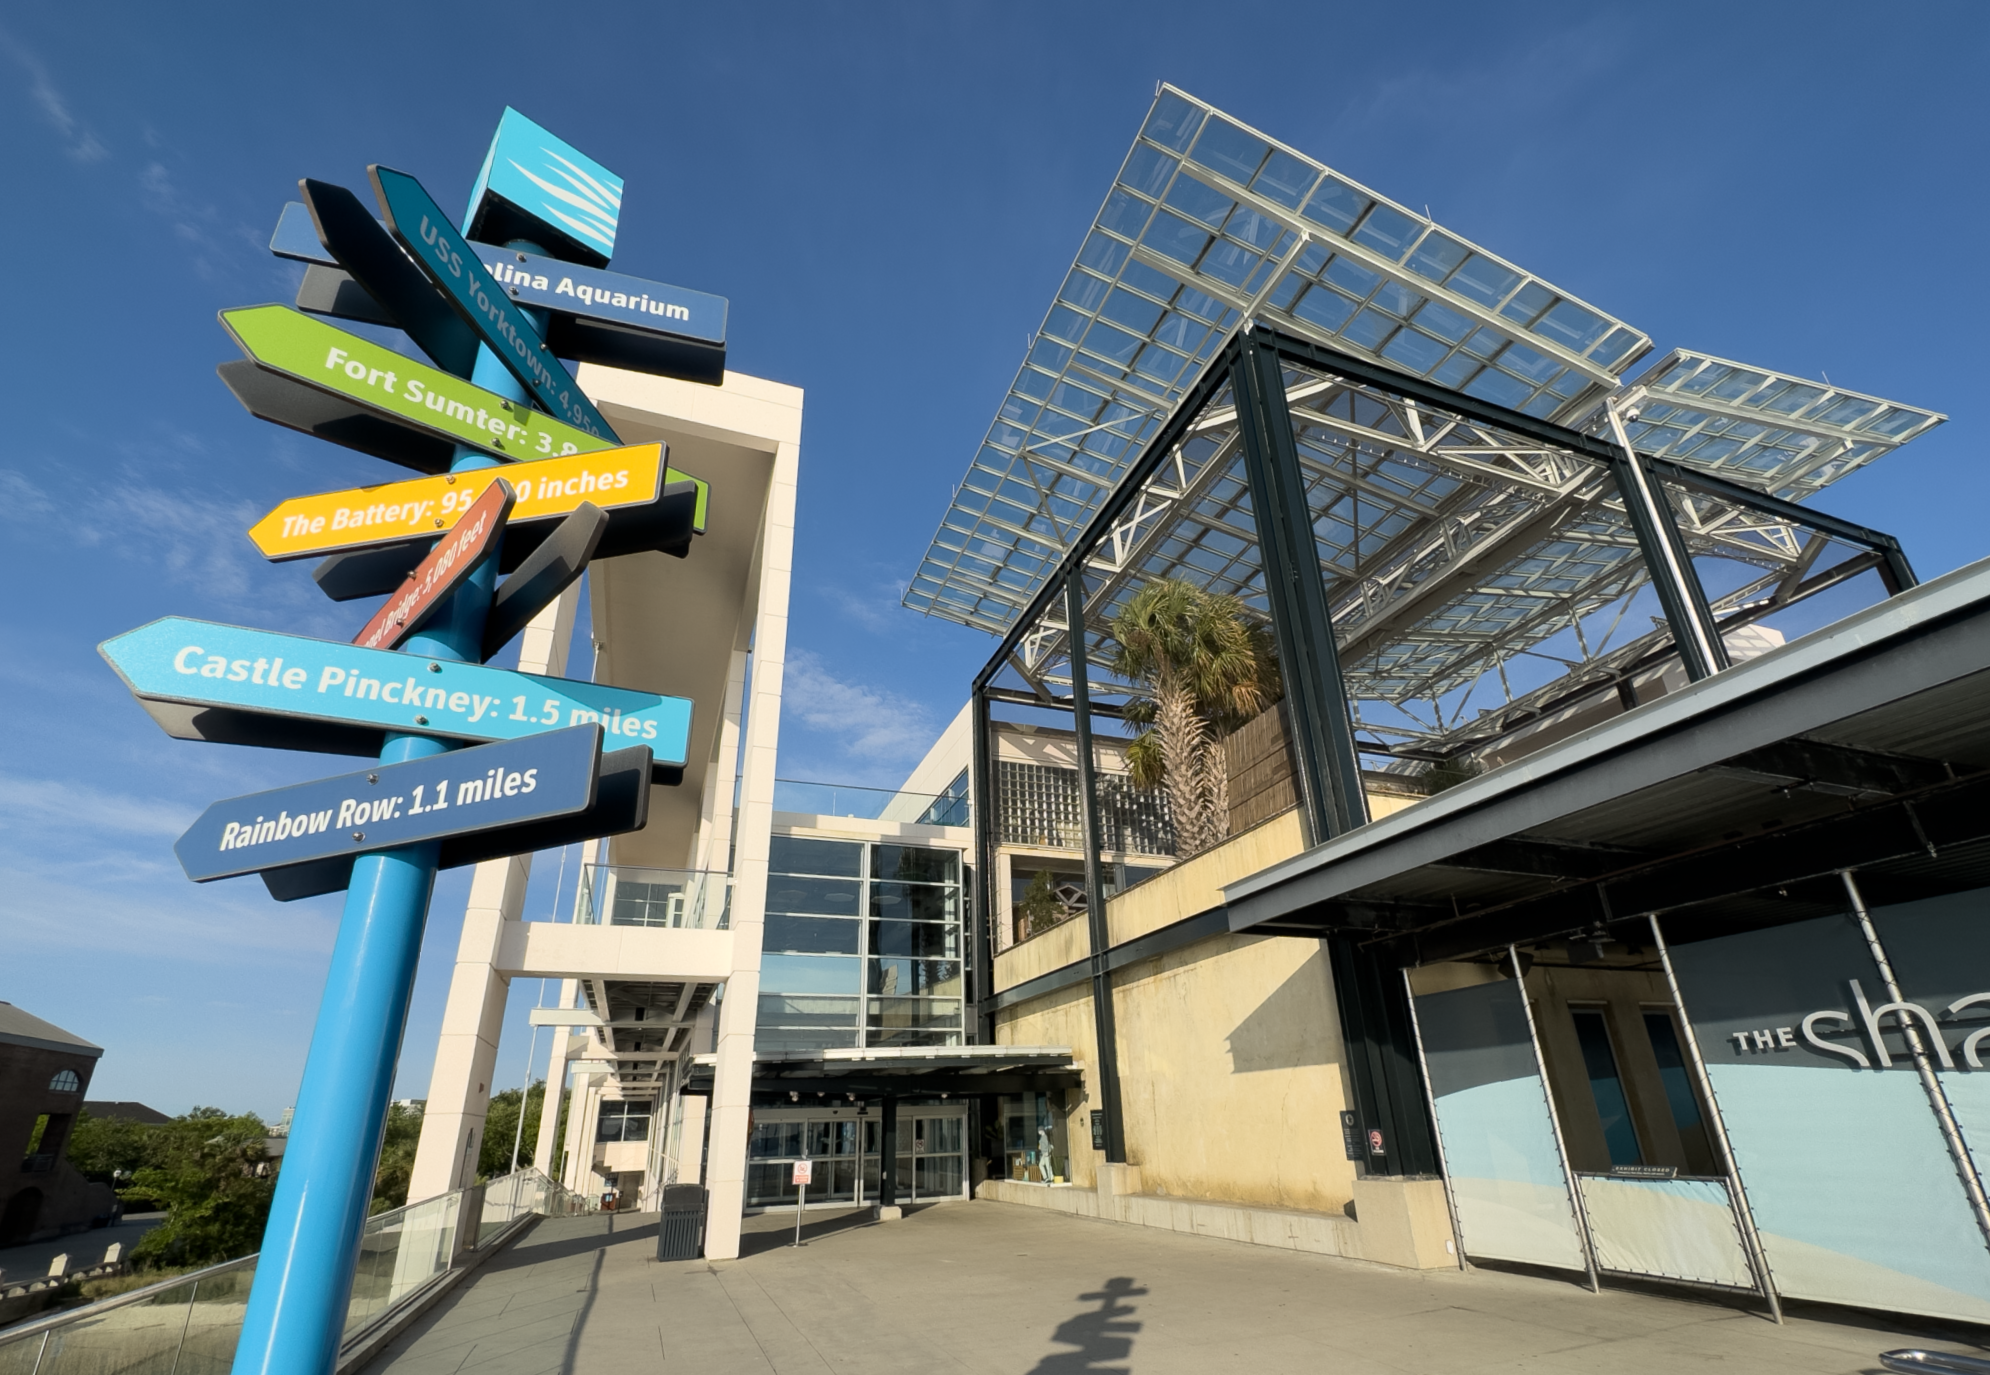 A wide-angle photo shows the guest entrance of the South Carolina Aquarium with a directional street sign in the foreground.